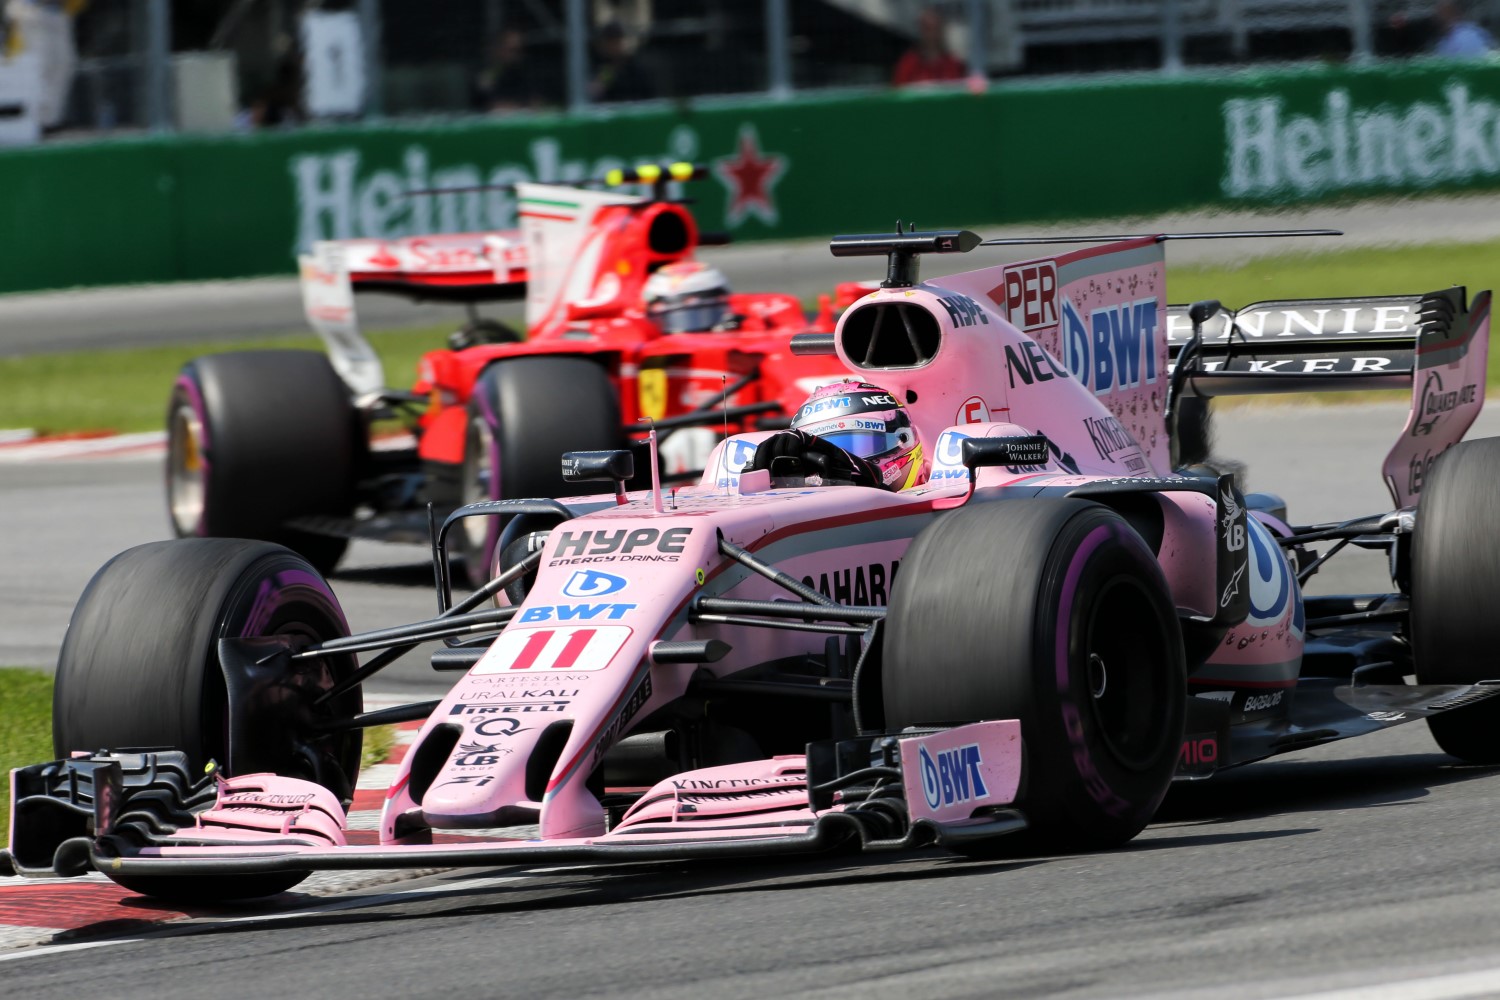 Ocon is dying to stand on the podium with his pretty pink uniform